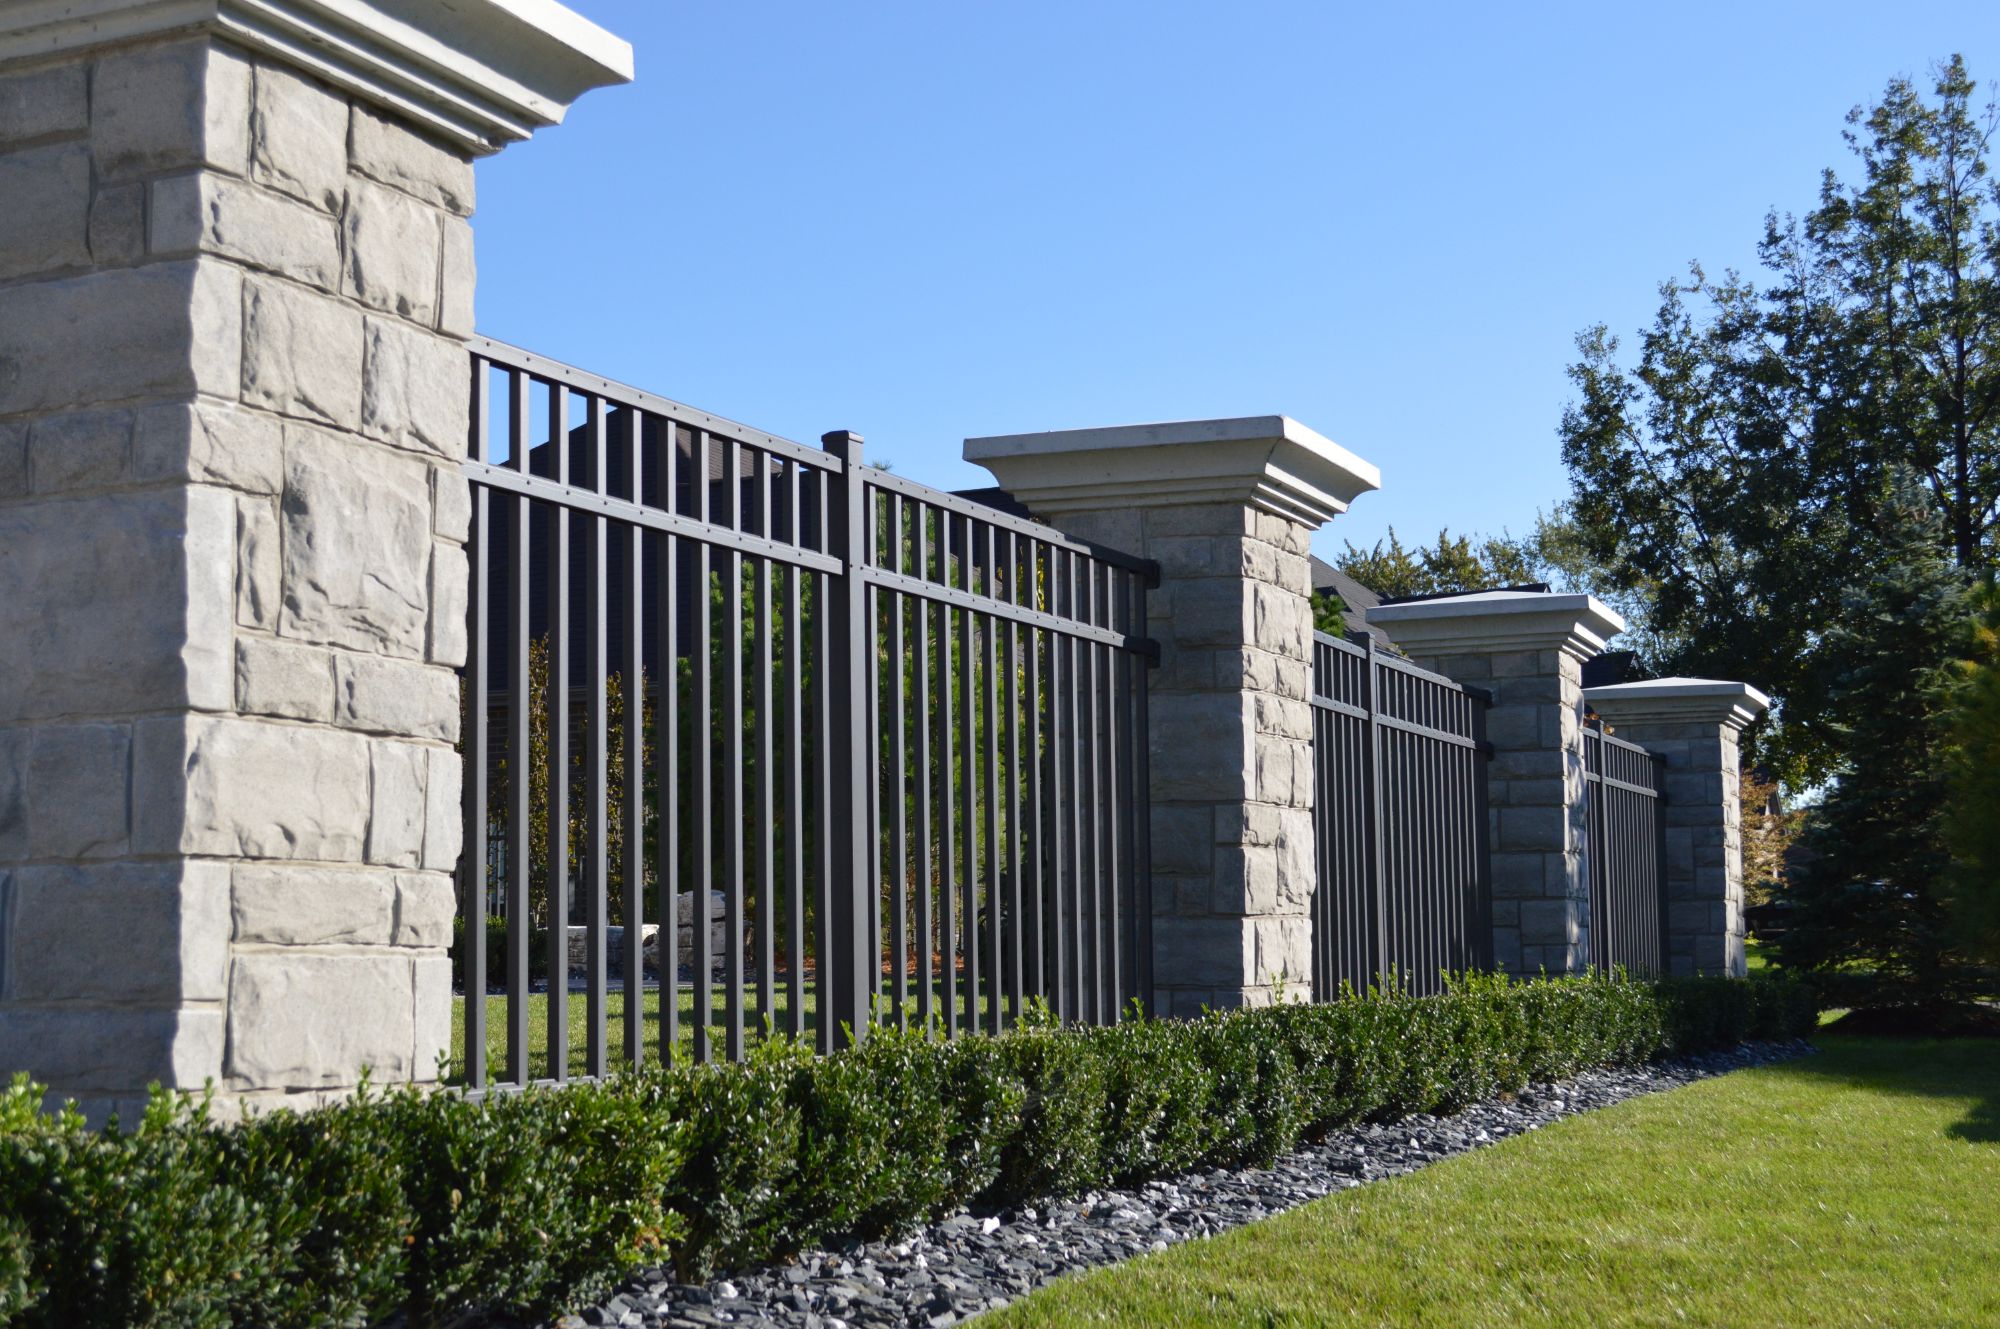 Stone columns with this industrial fence, it$quot;s a beautiful setup at 5 feet tall. When you pull up to this house, it makes a grand statement.